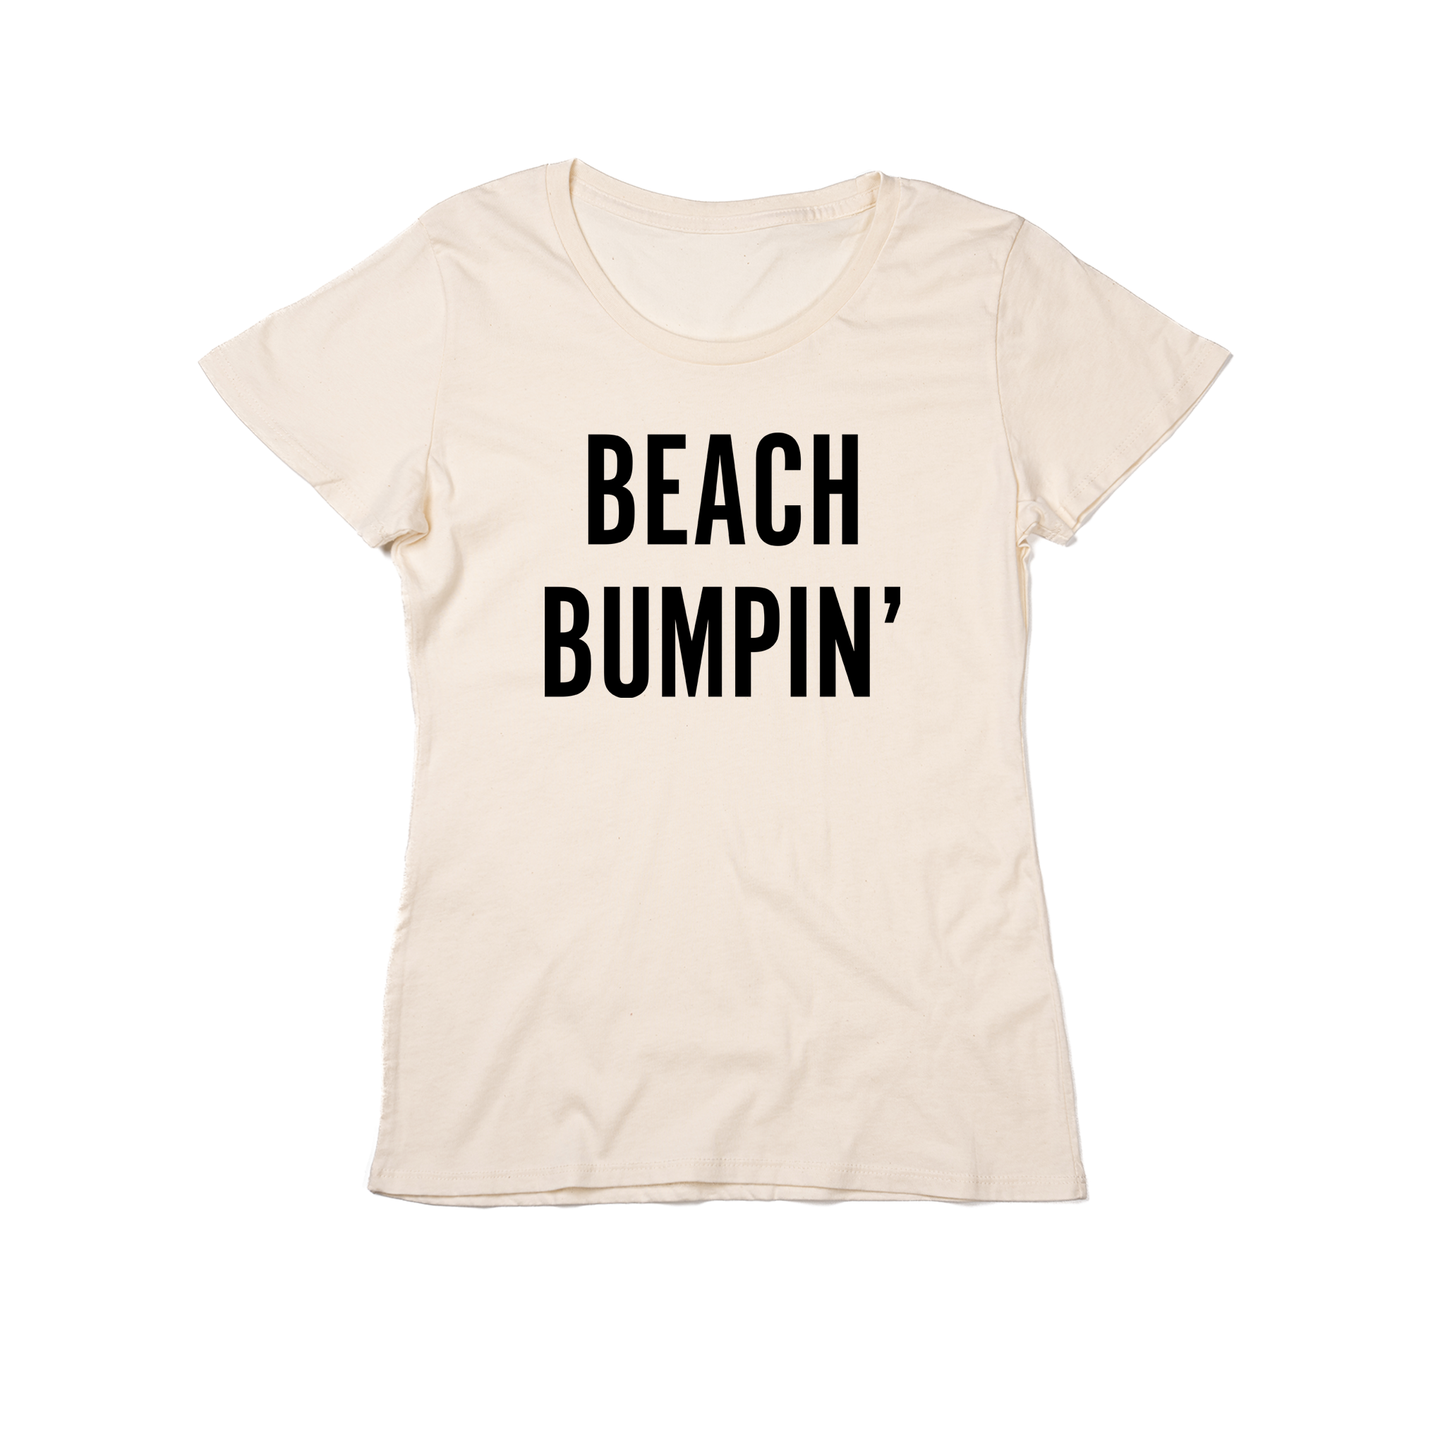 Beach Bumpin' (Black) - Women's Fitted Tee (Natural)